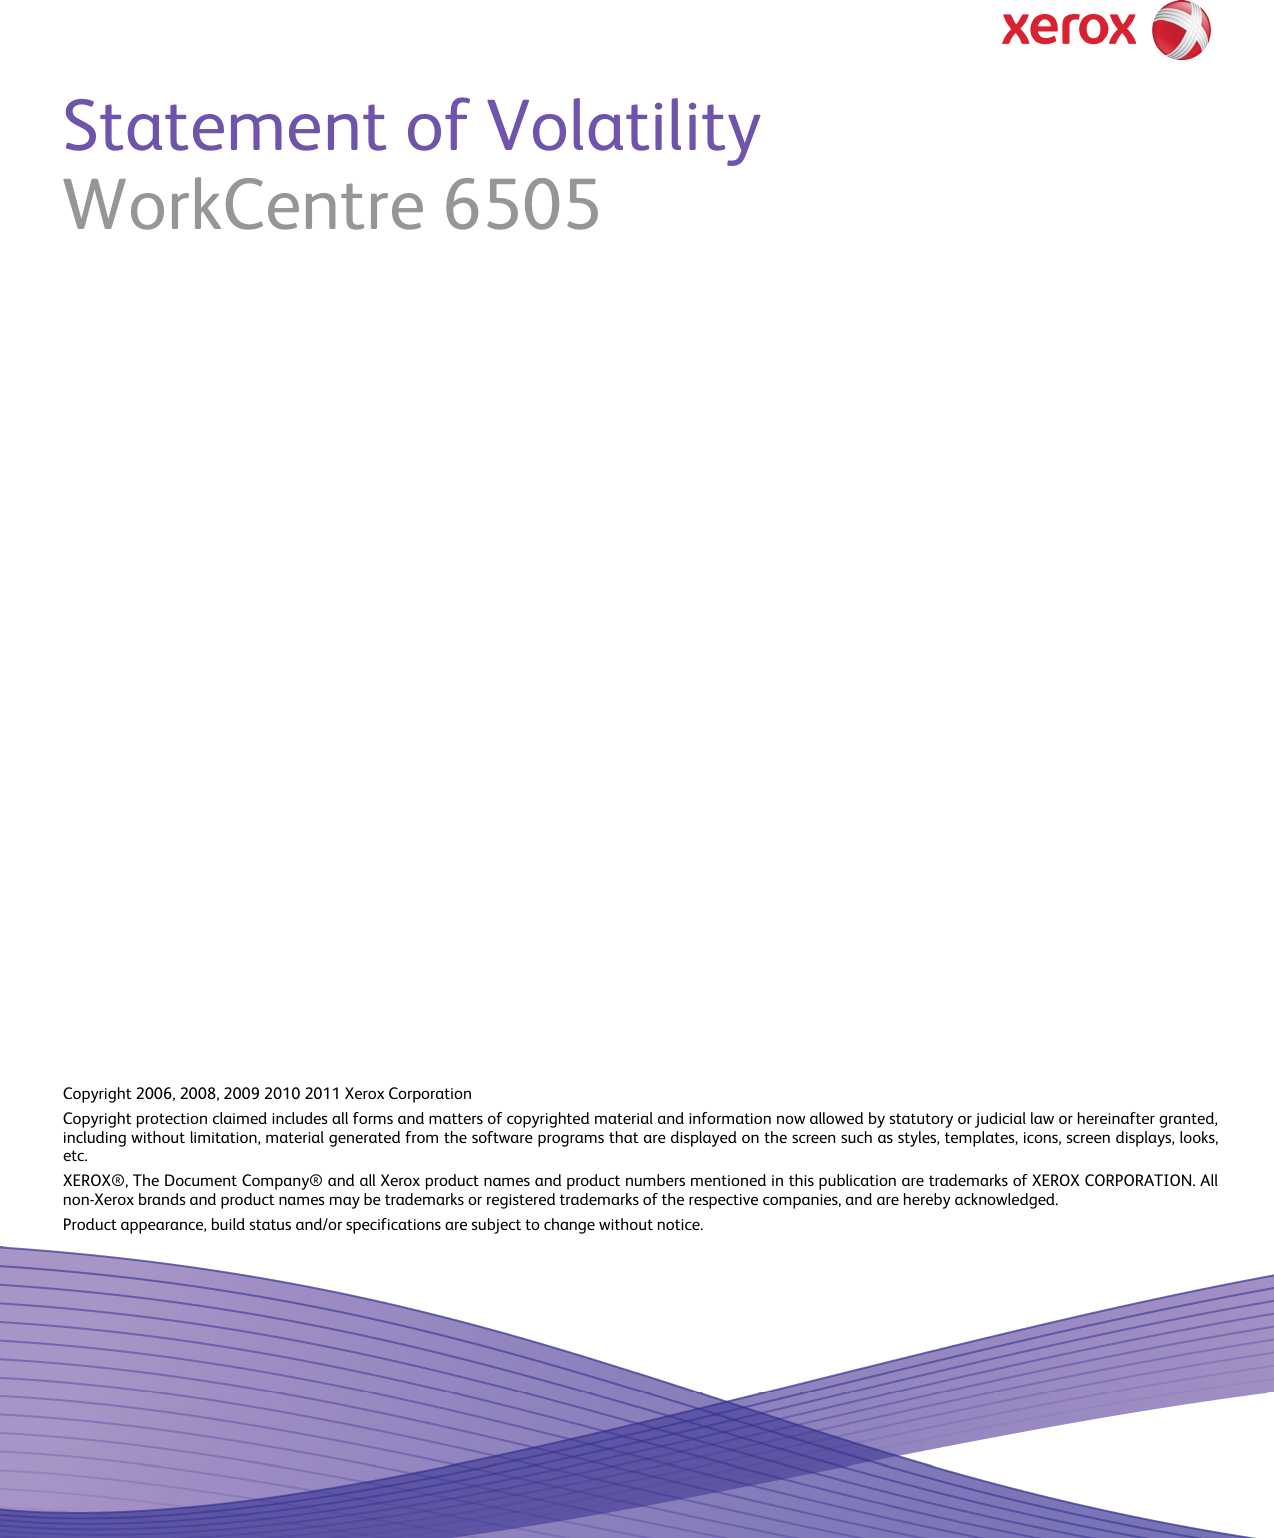 Page 1 of 6 - Xerox Xerox-Workcentre-6505-Users-Manual WorkCentre_6505_Statement_Of_Volatility